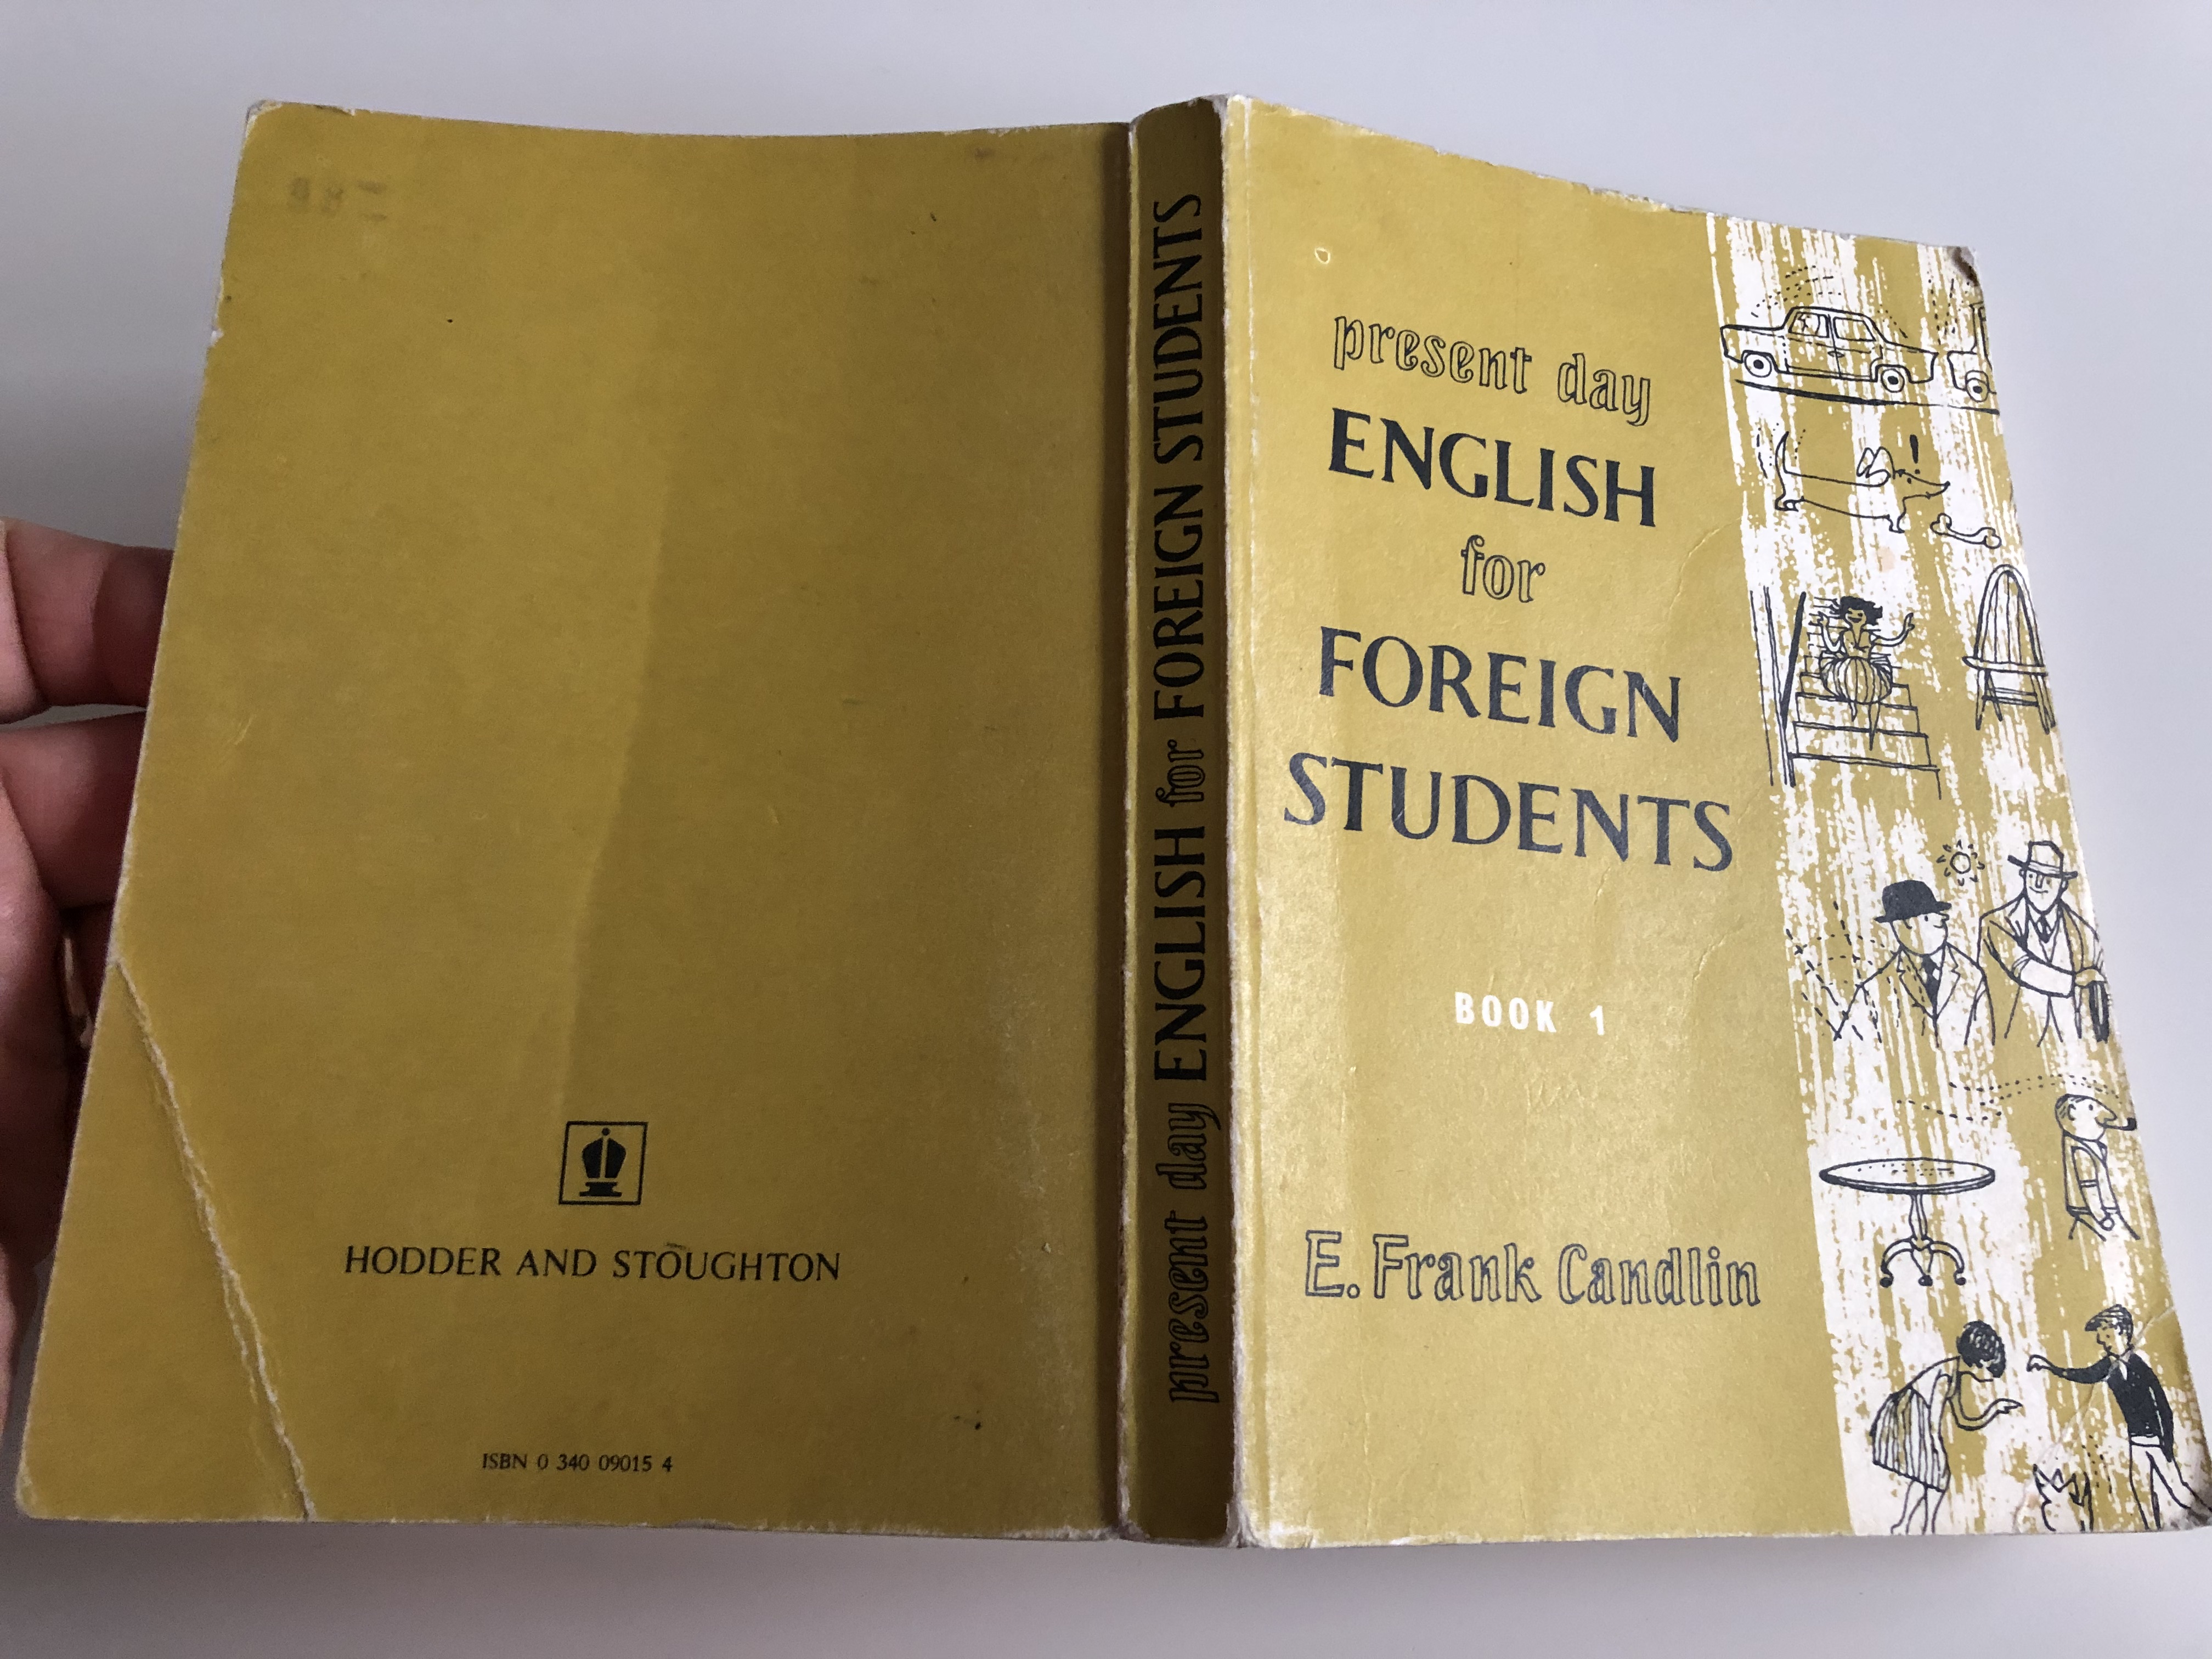 present-day-english-for-foreign-students-book-1-by-e.-frank-candlin-hodder-and-stoughton-1975-14.jpg